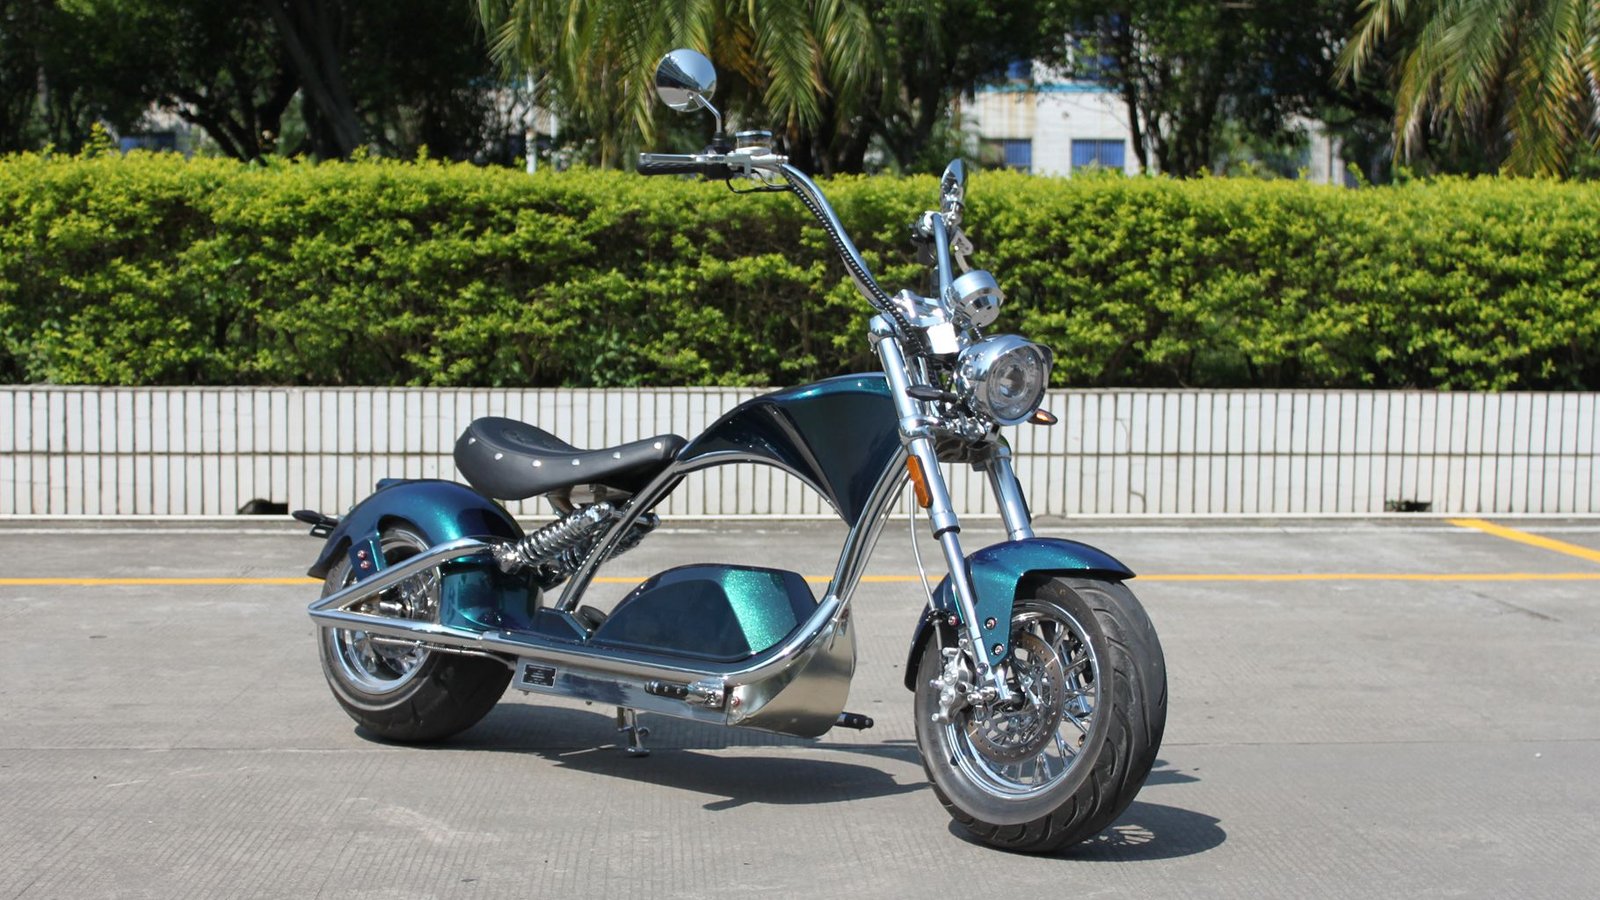 Rooder sara m1ps electric scooter bike citycoco chopper 72v 4000w diamond turquoise green  (4)